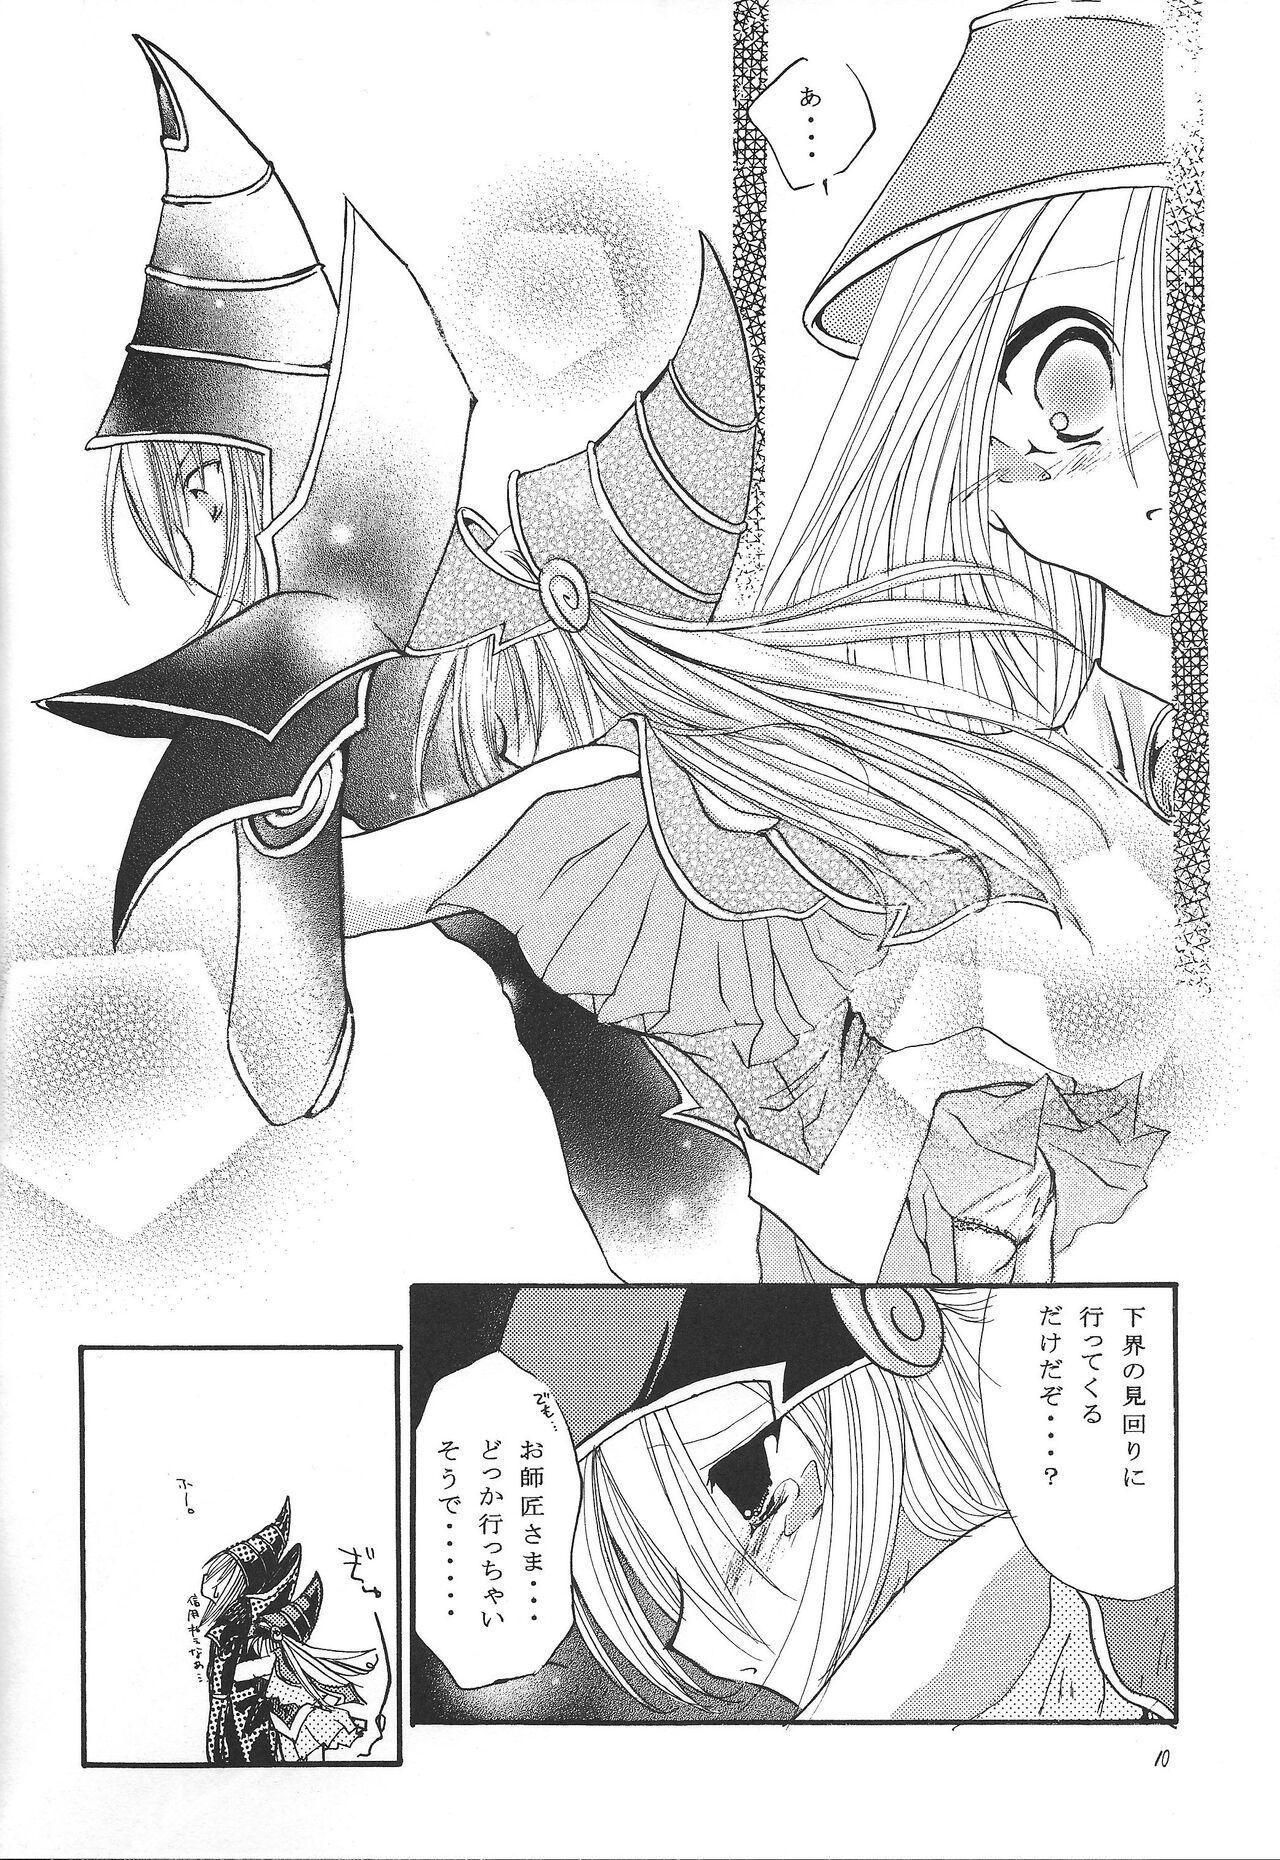 Gemidos pleasures of the moment - Yu gi oh Uncensored - Page 9